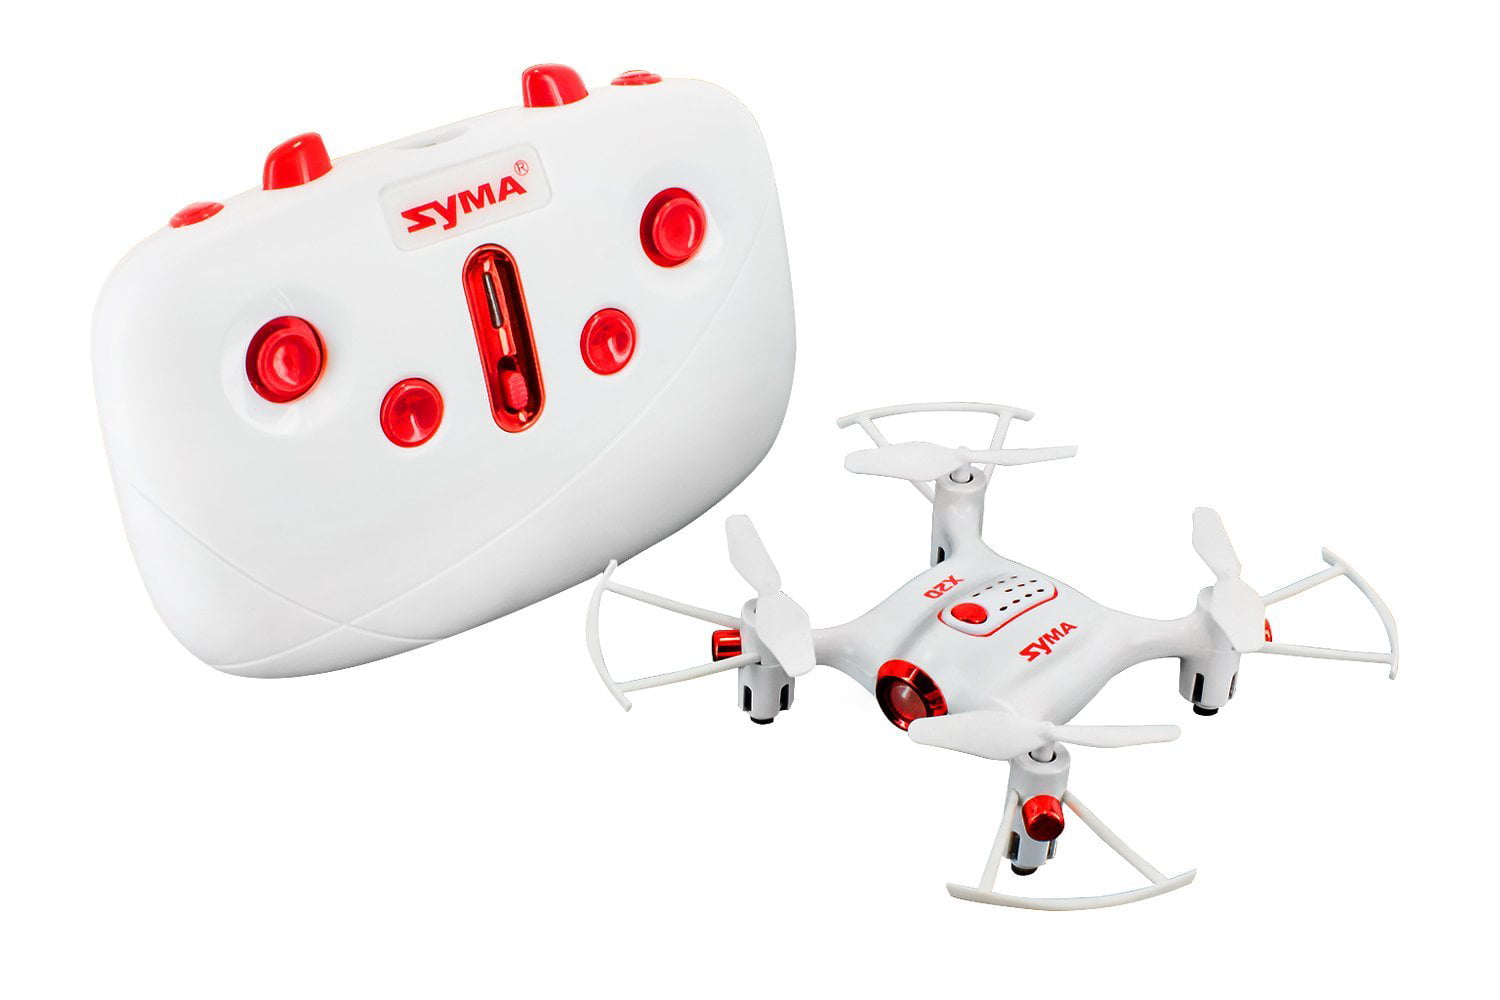 Tenergy Syma X20 Drone, Headless Quadcopter RC Drone with Altitude Hold and Stunt Button, Easy to Fly Pocket Drone for (White) -